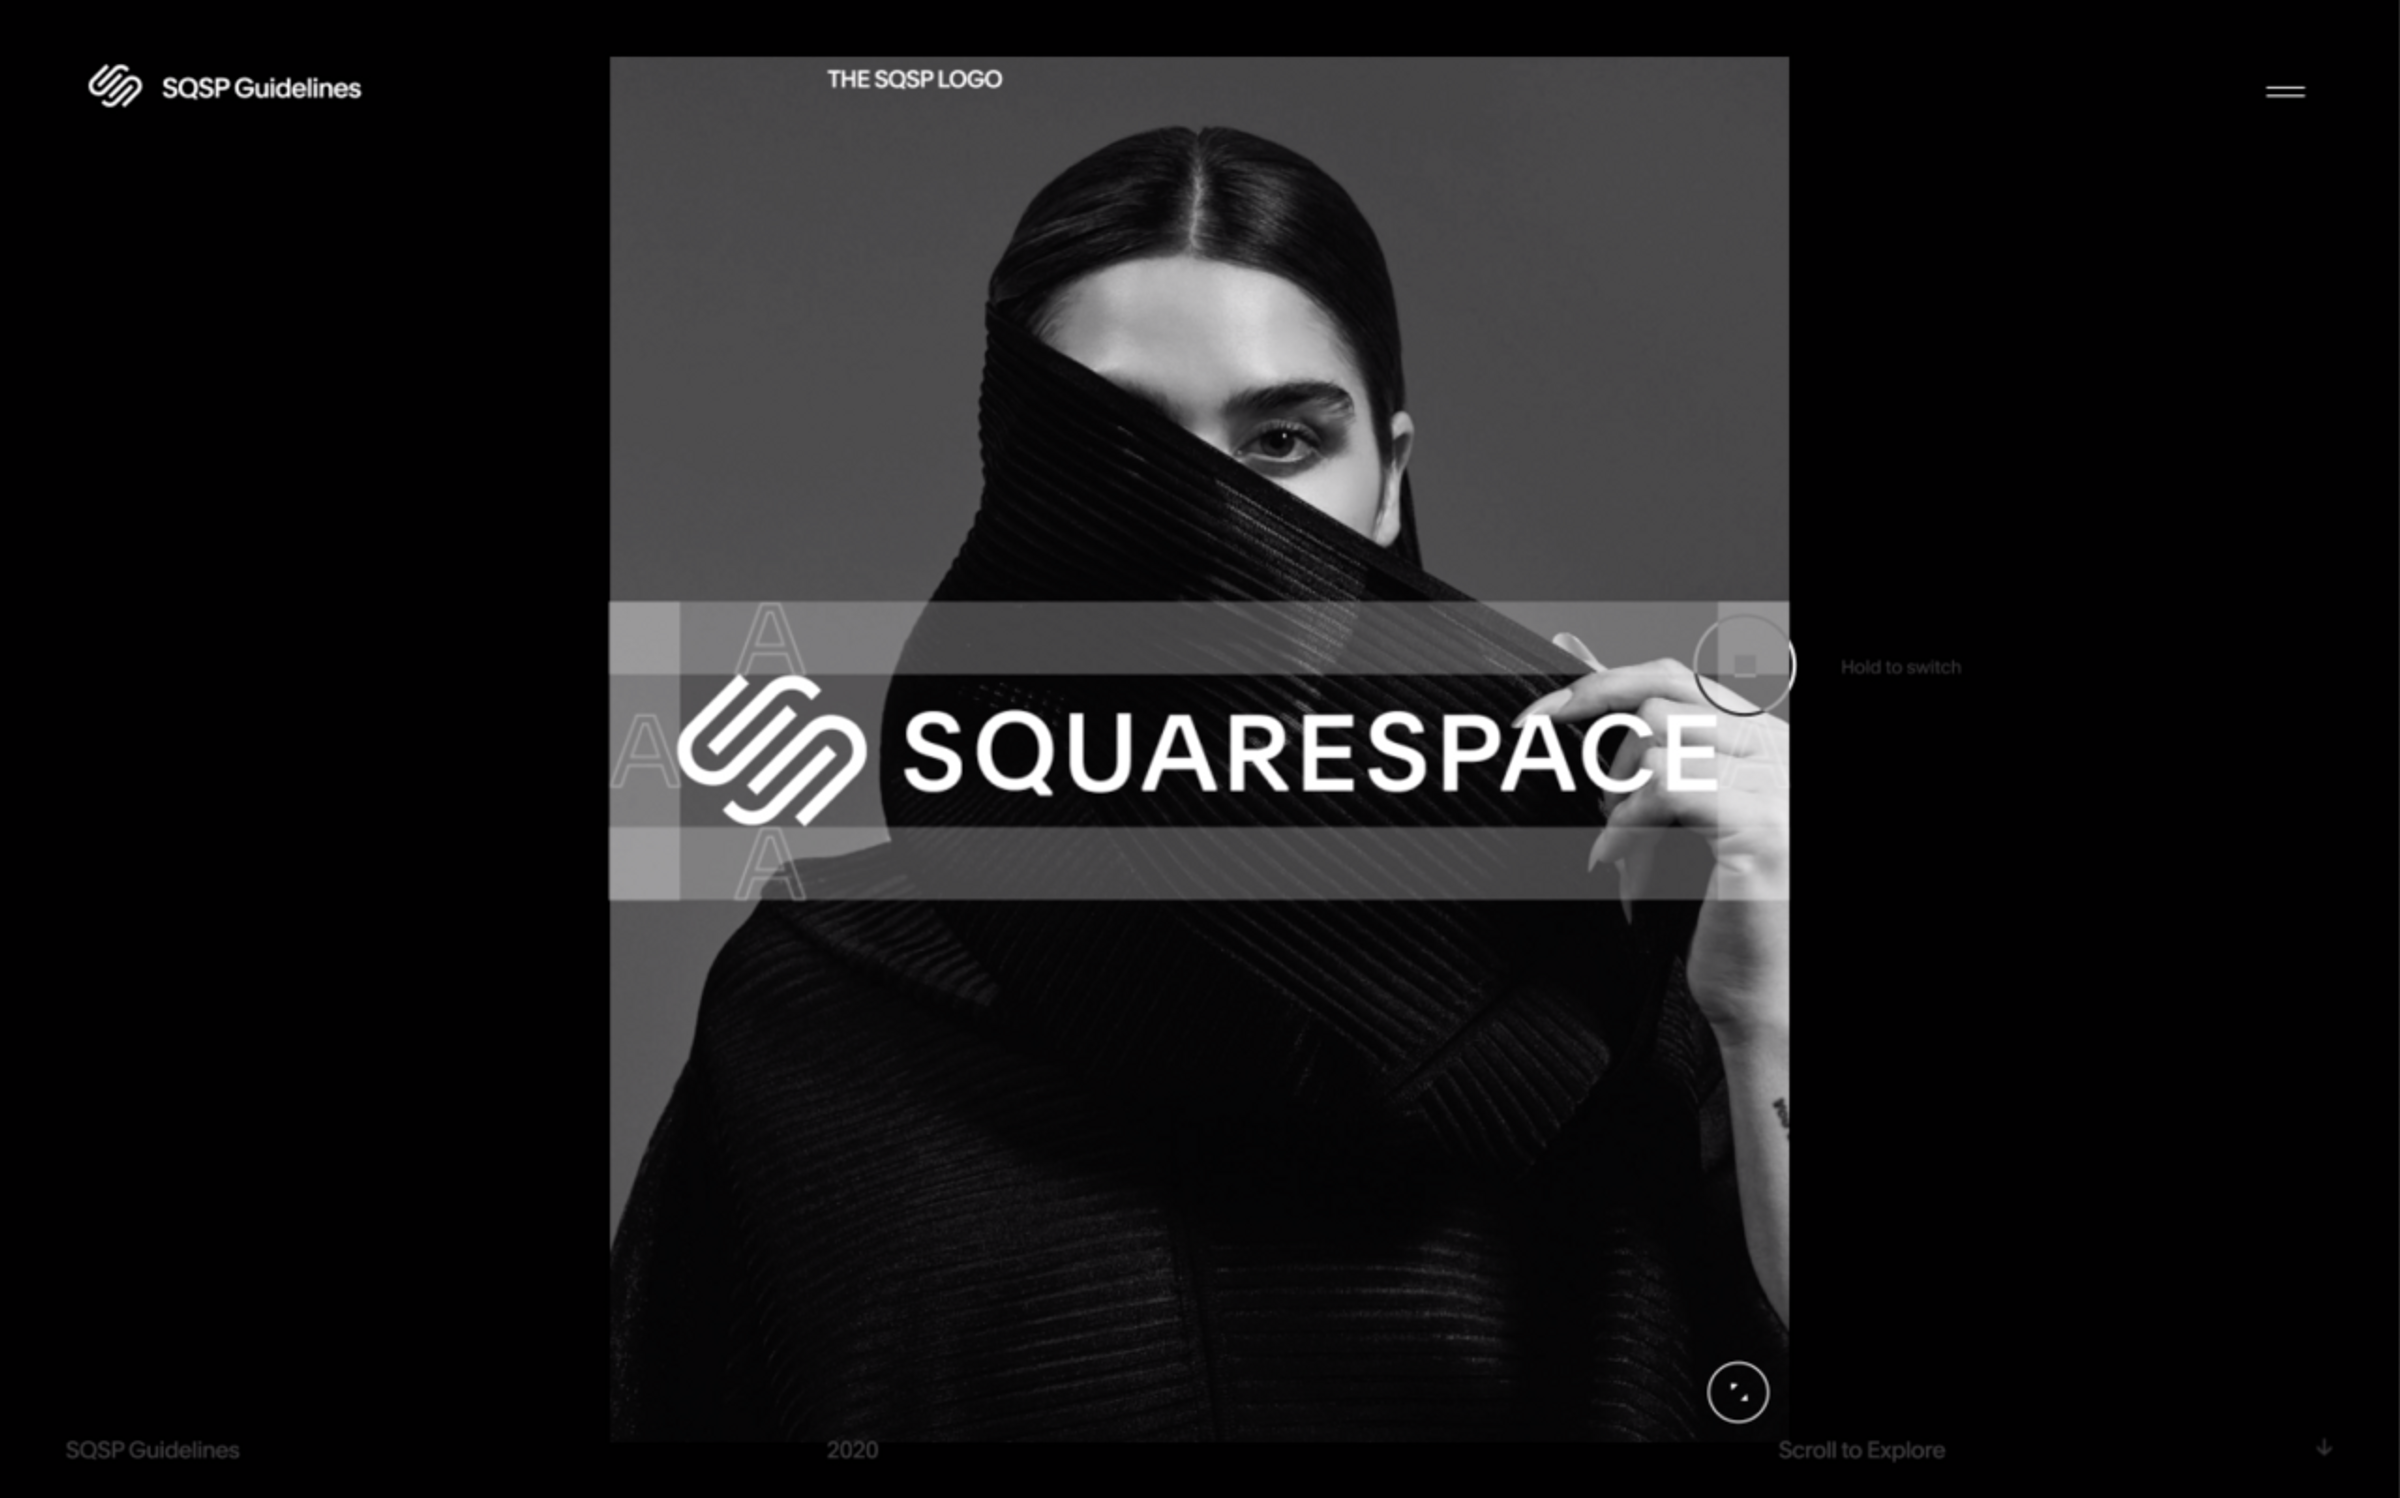 The image lightbox on the Squarespace brand guidelines website